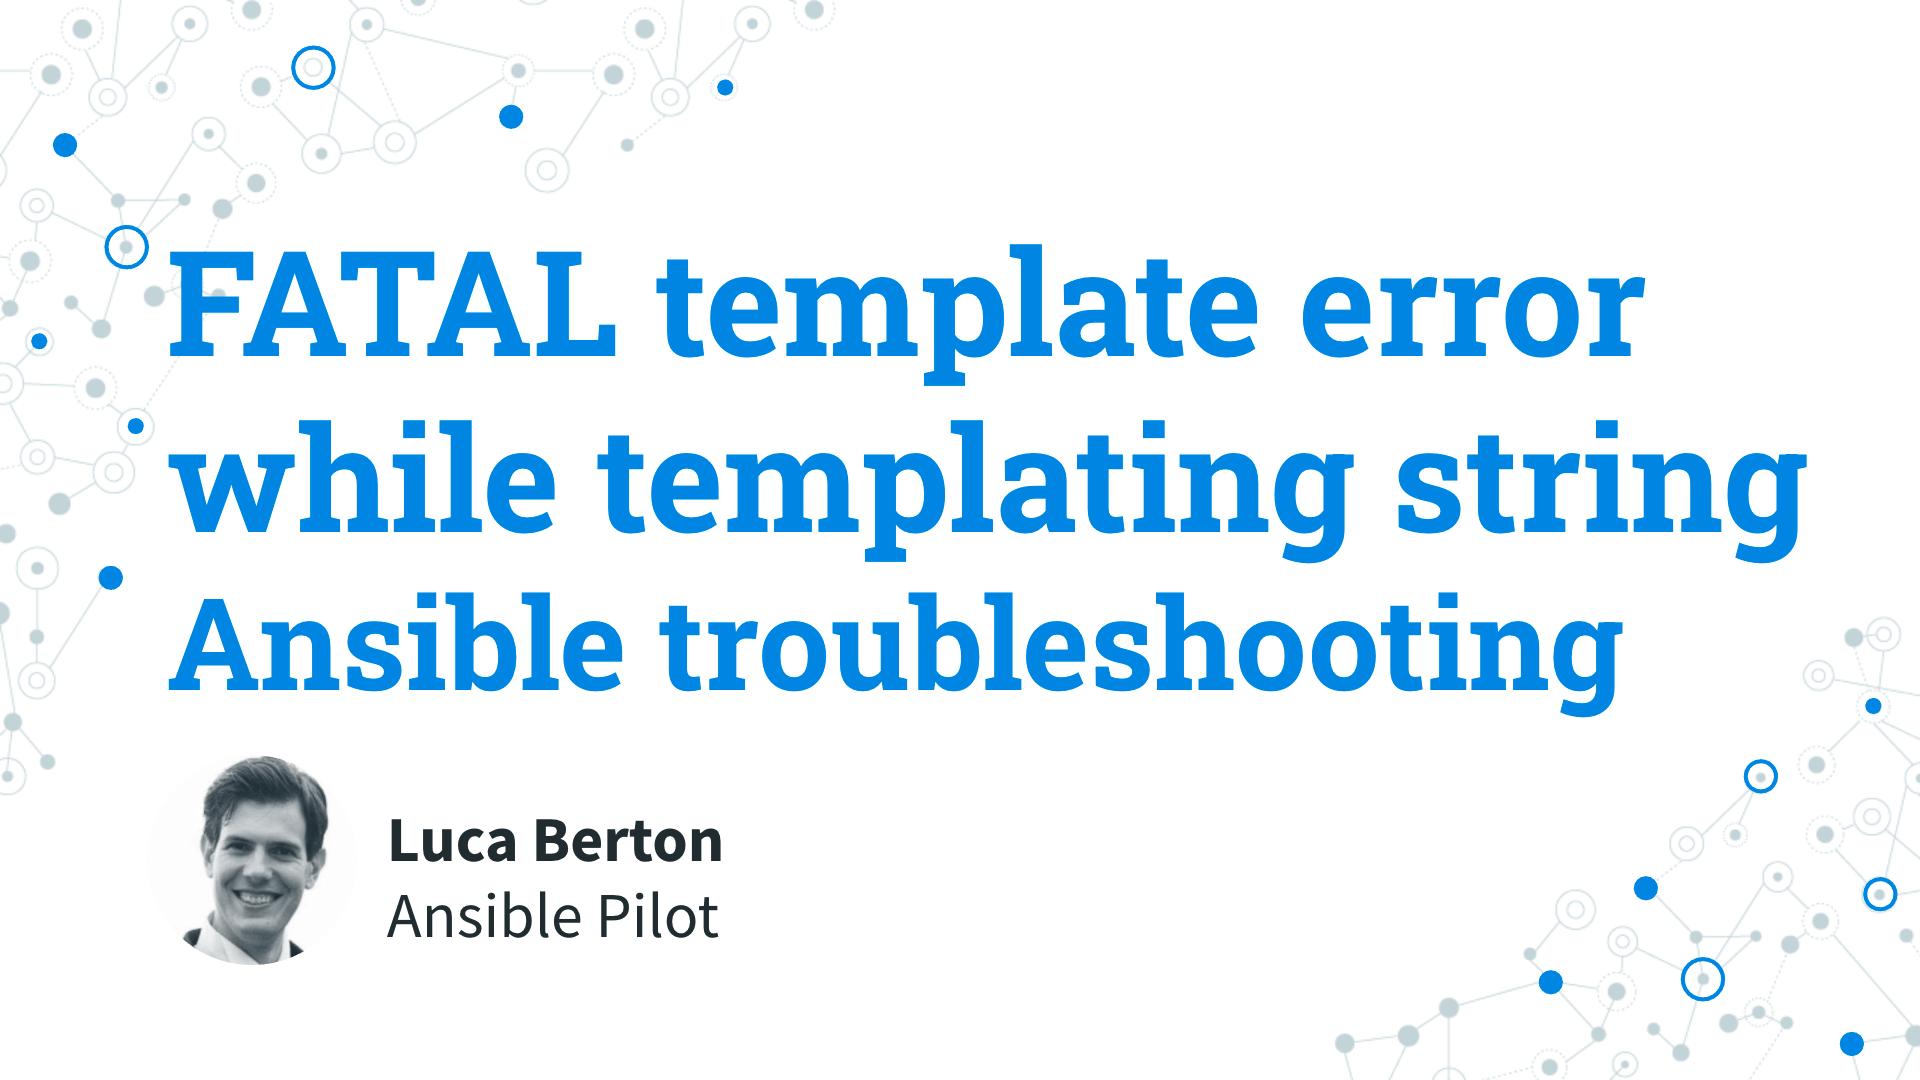 Ansible troubleshooting - fatal template error while templating string